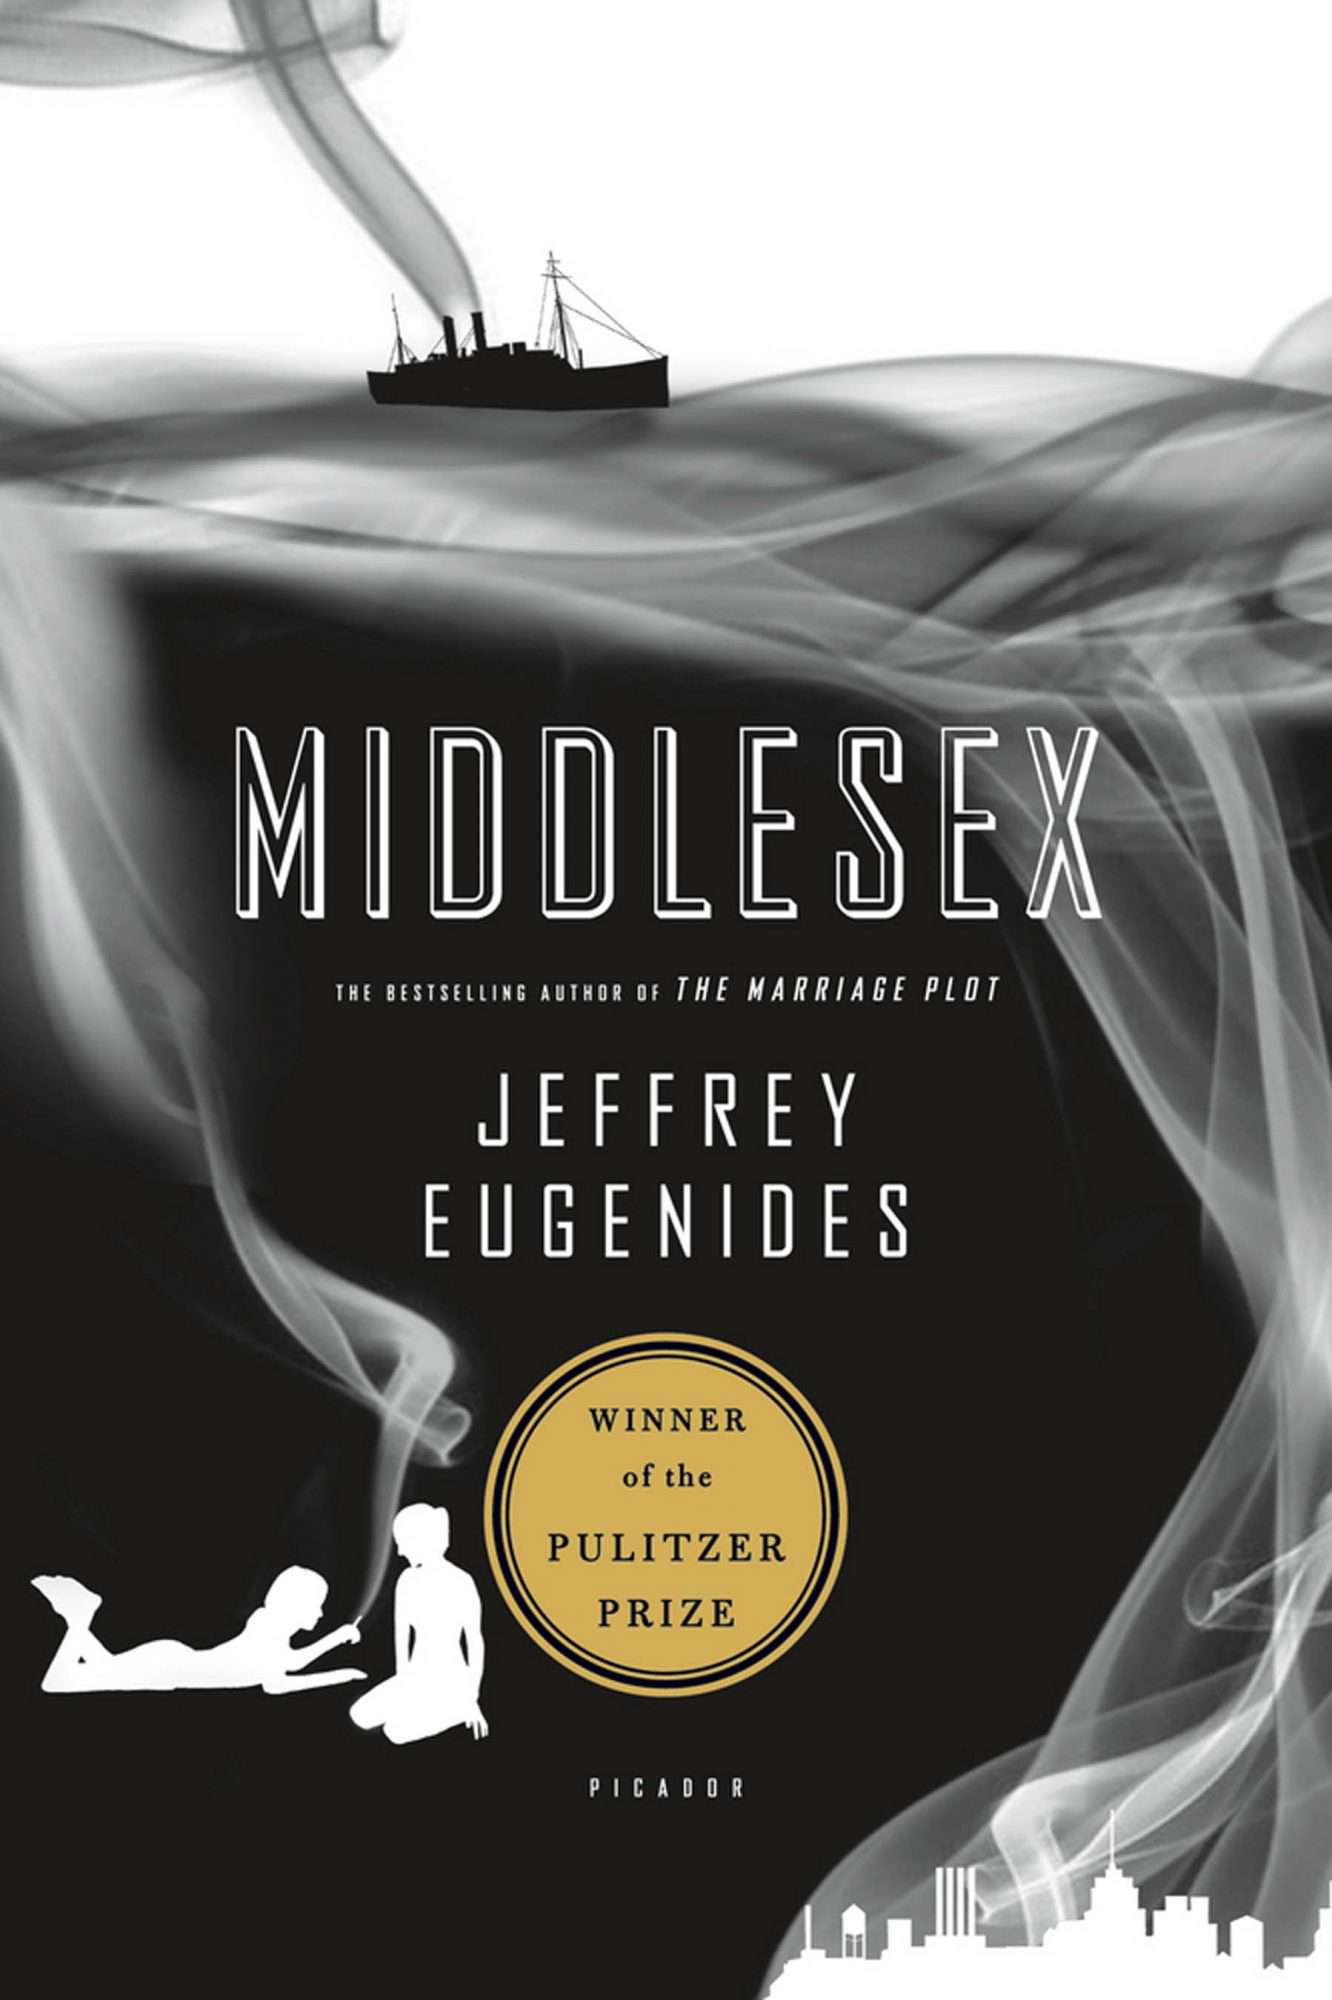 Middlesex by Jeffrey Eugenides (2002)